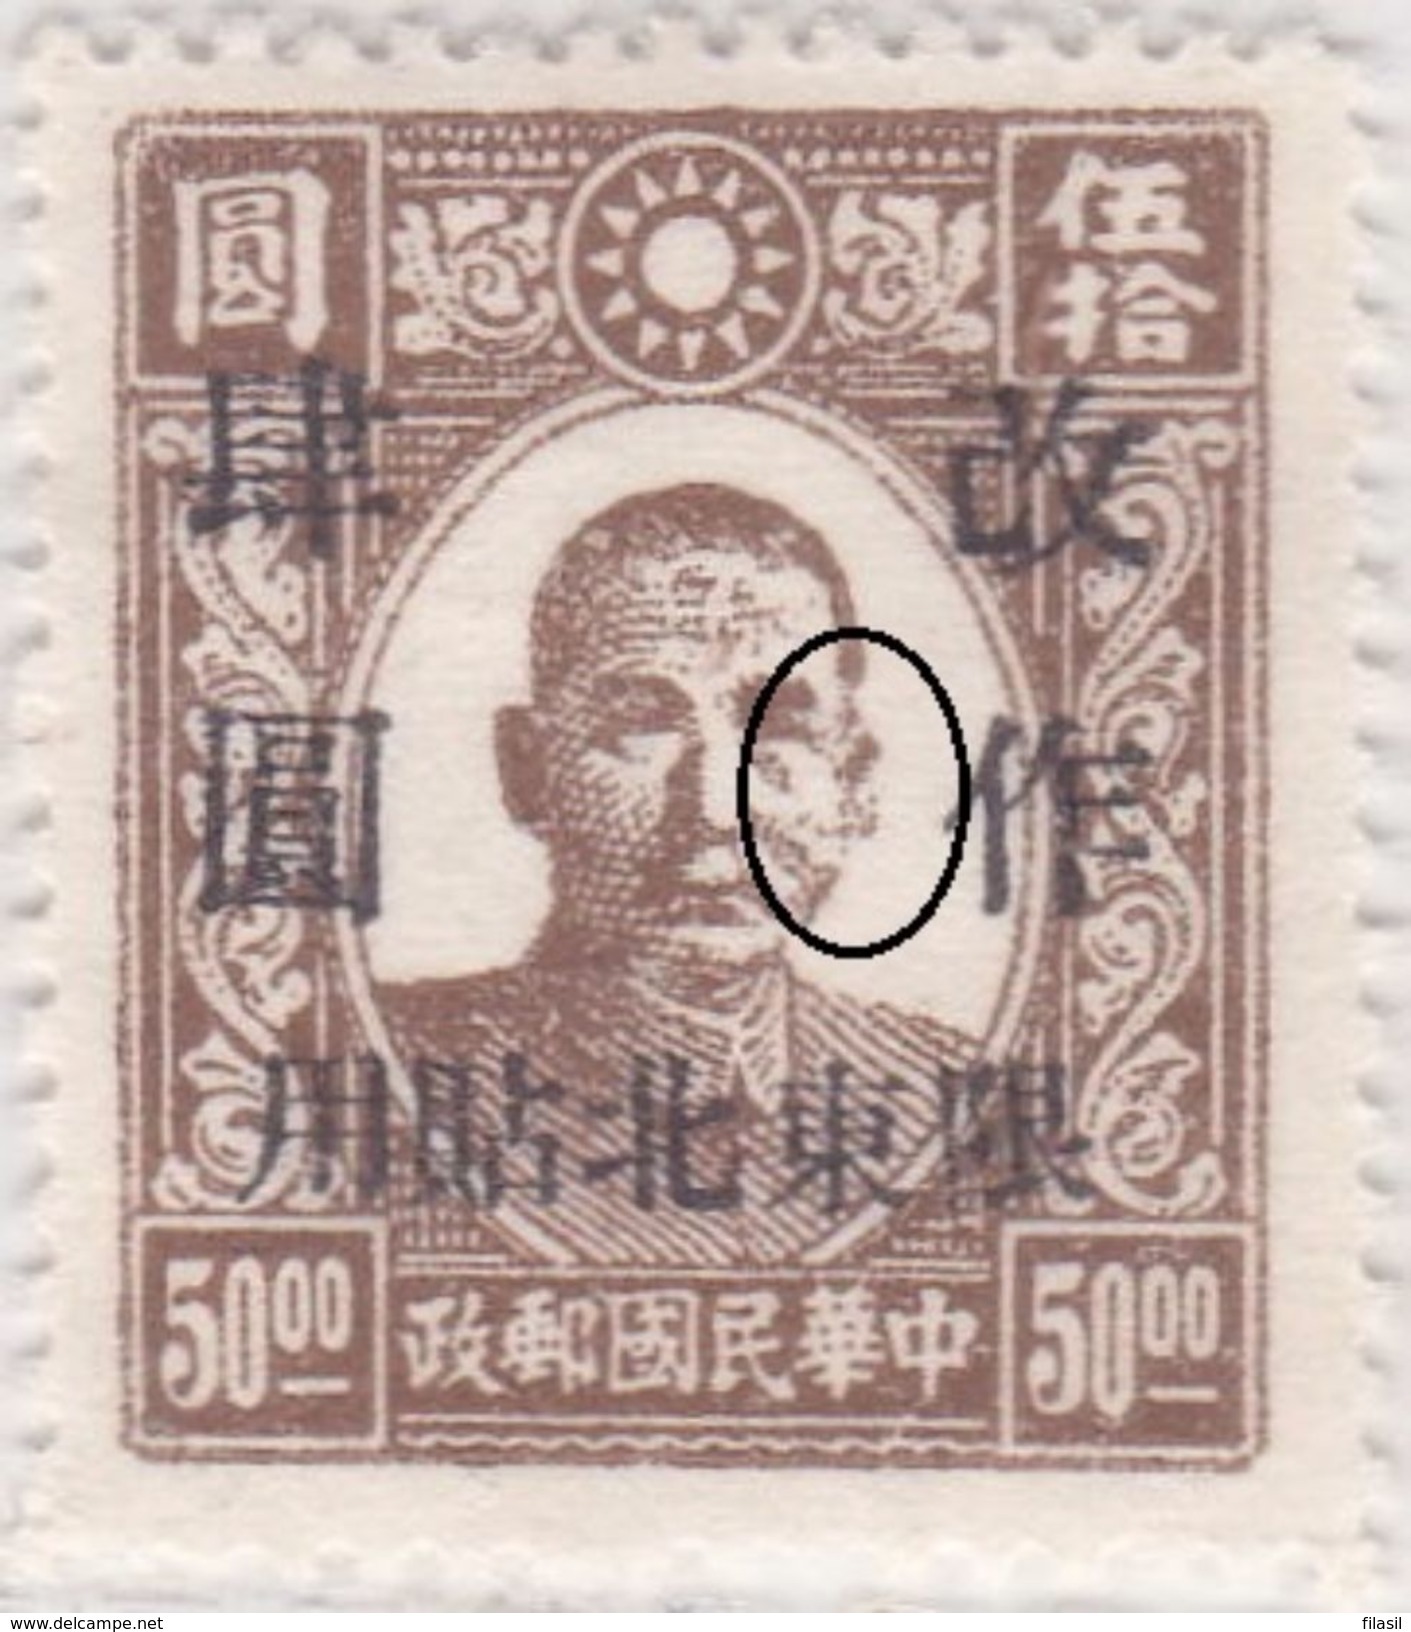 SI53D Cina China Chine 50 Rare Fine  Yuan  Surcharge Missing Print  NO Gum - 1941-45 Chine Du Nord